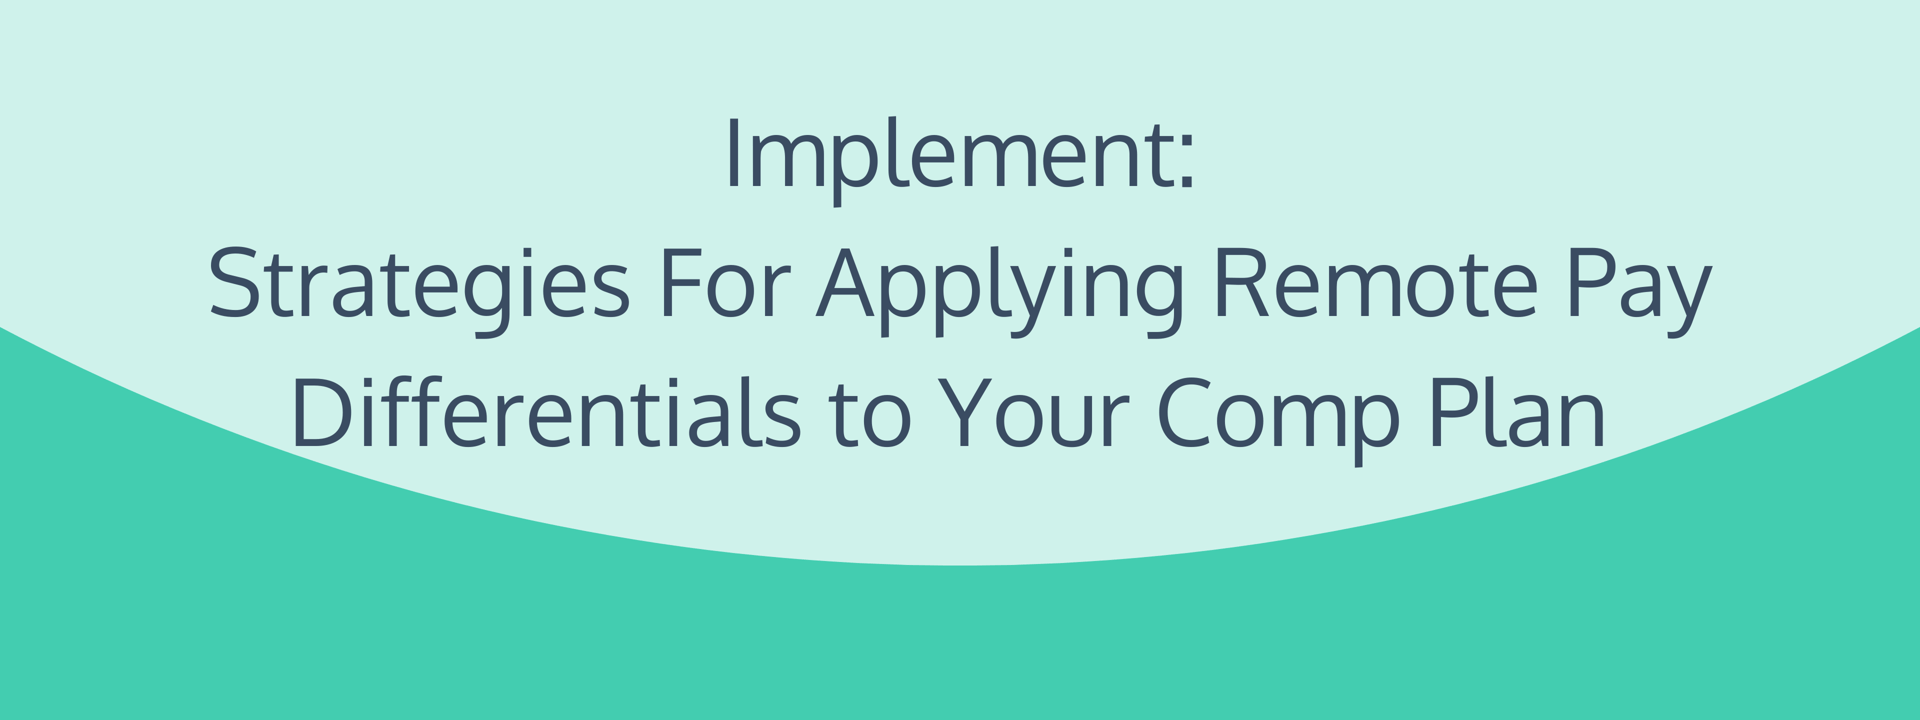 Implement: Strategies for Applying Remote Pay Differentials to Your Compensation Program